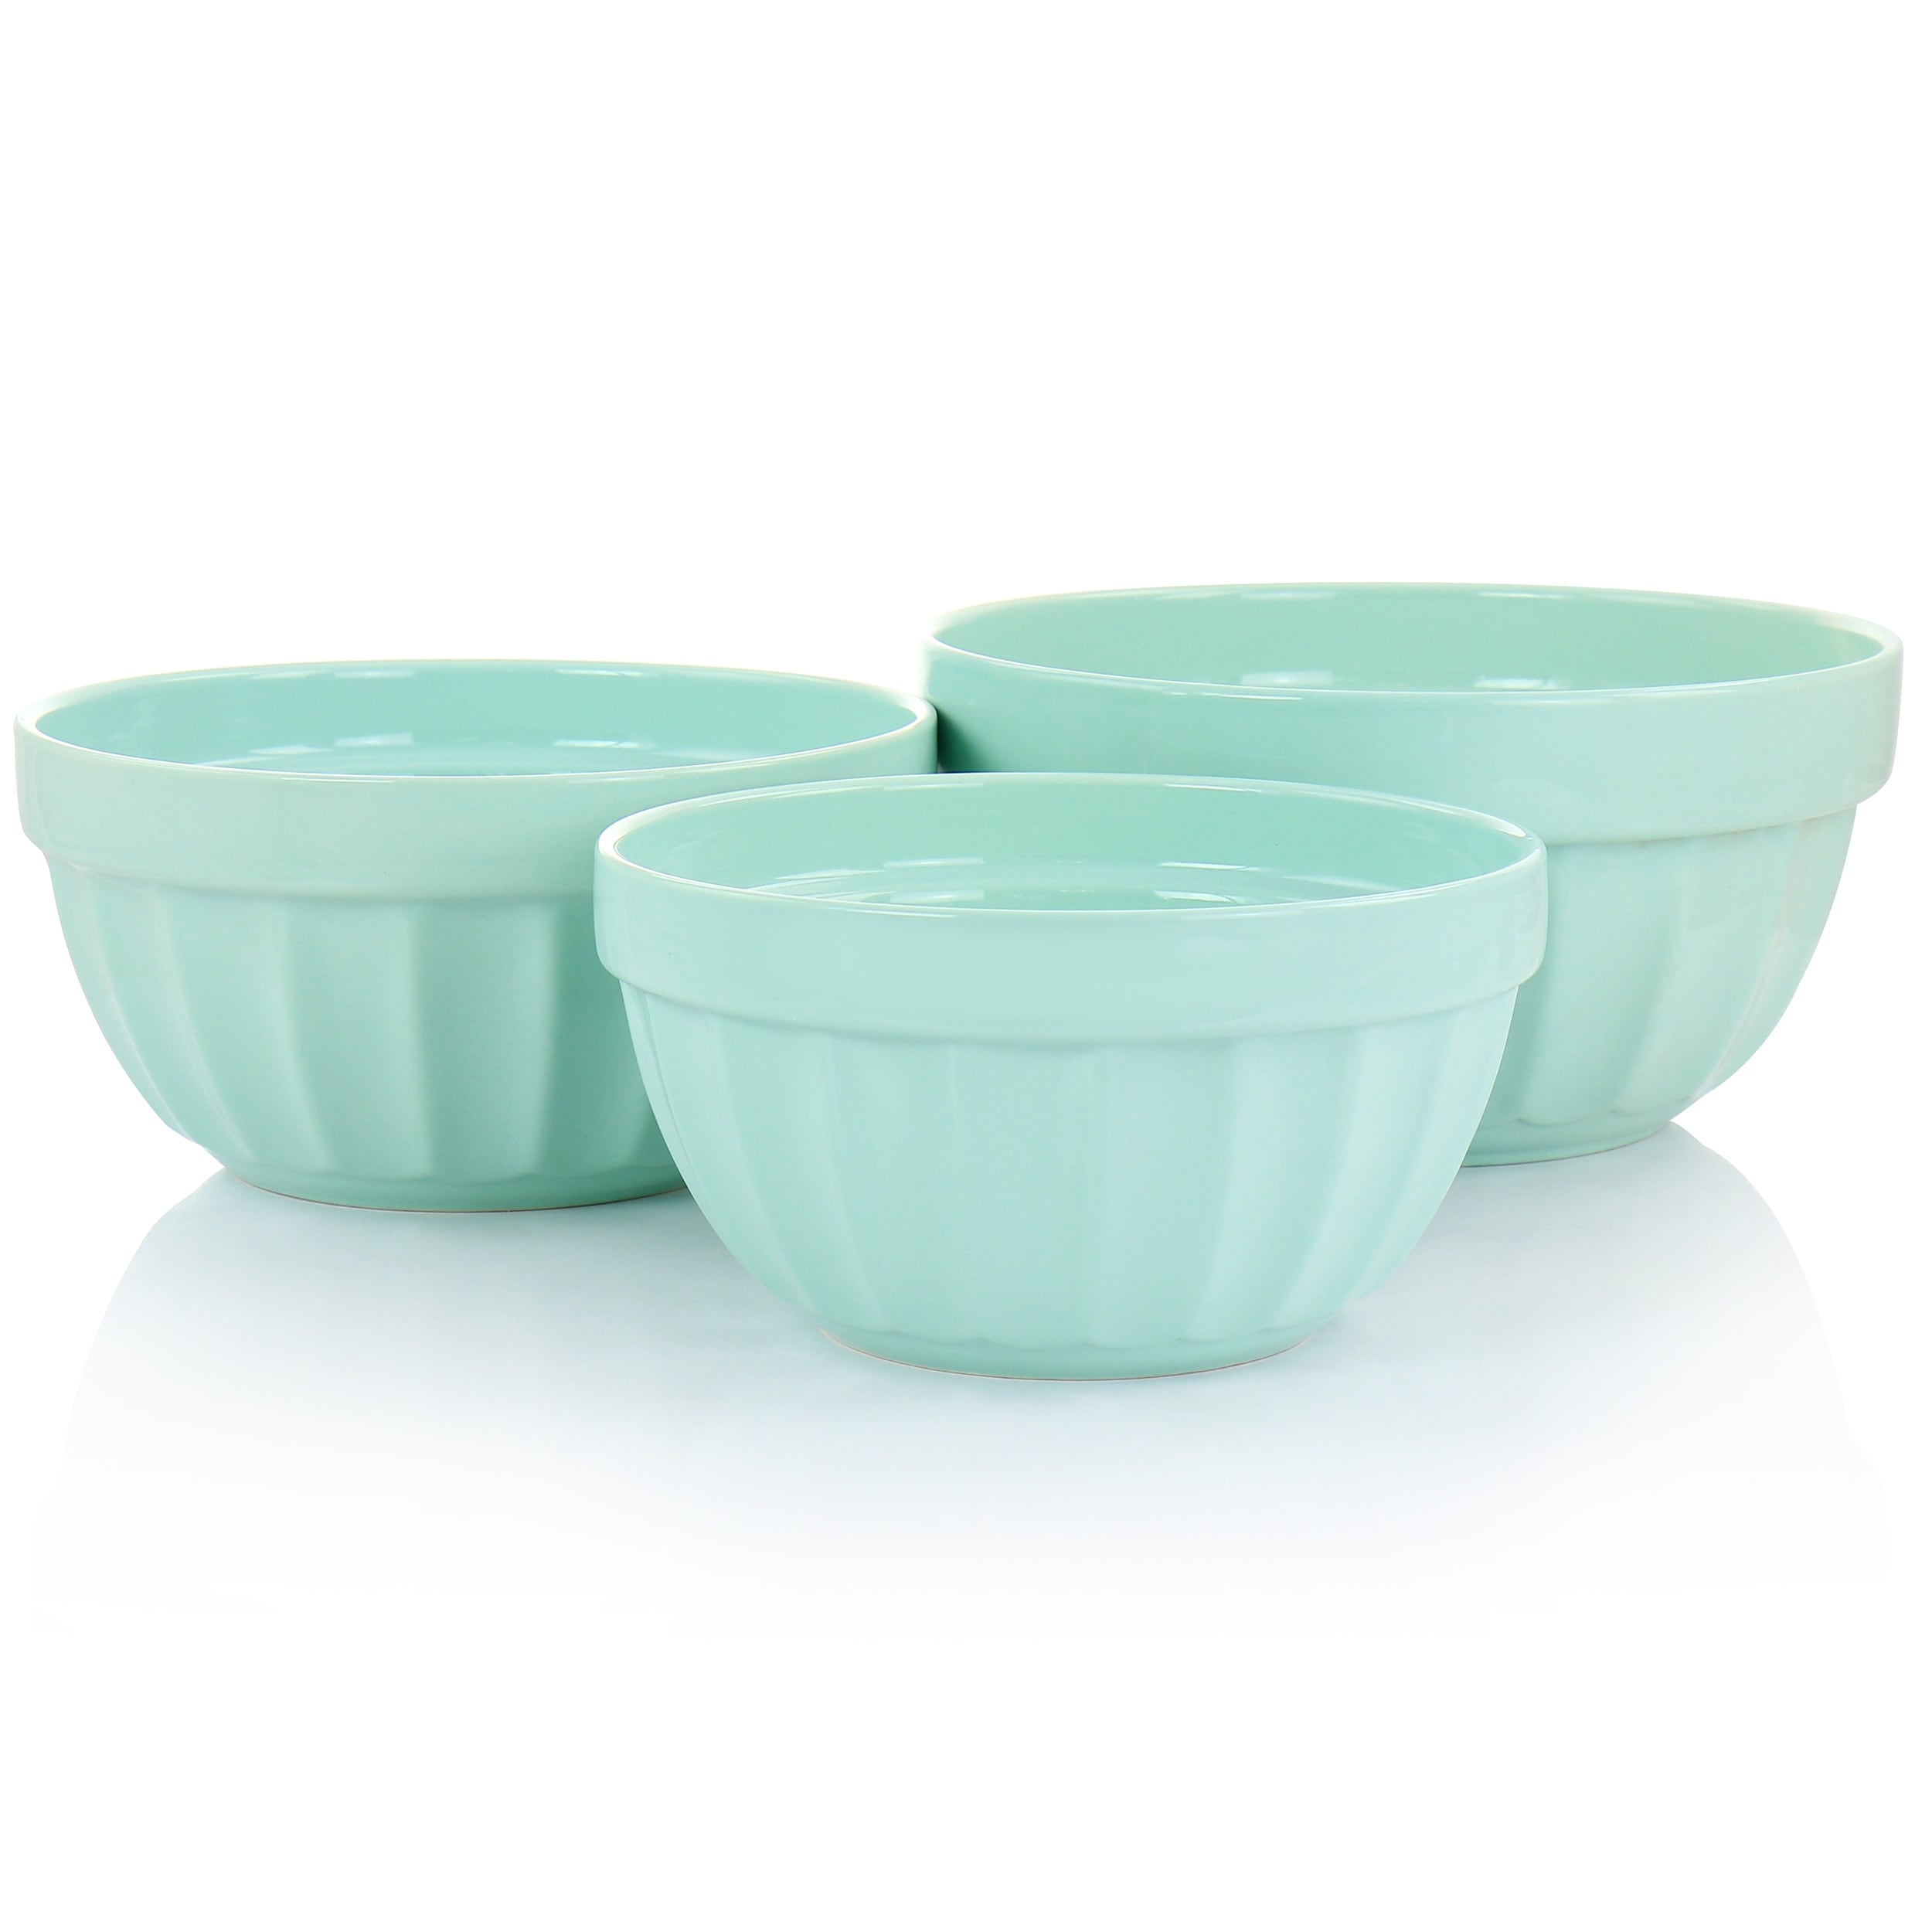 https://ak1.ostkcdn.com/images/products/is/images/direct/07029d21bcc814f90c85556324bec5ae341dc7d5/Martha-Stewart-3-Piece-Stoneware-Bowl-Set-in-Mint.jpg